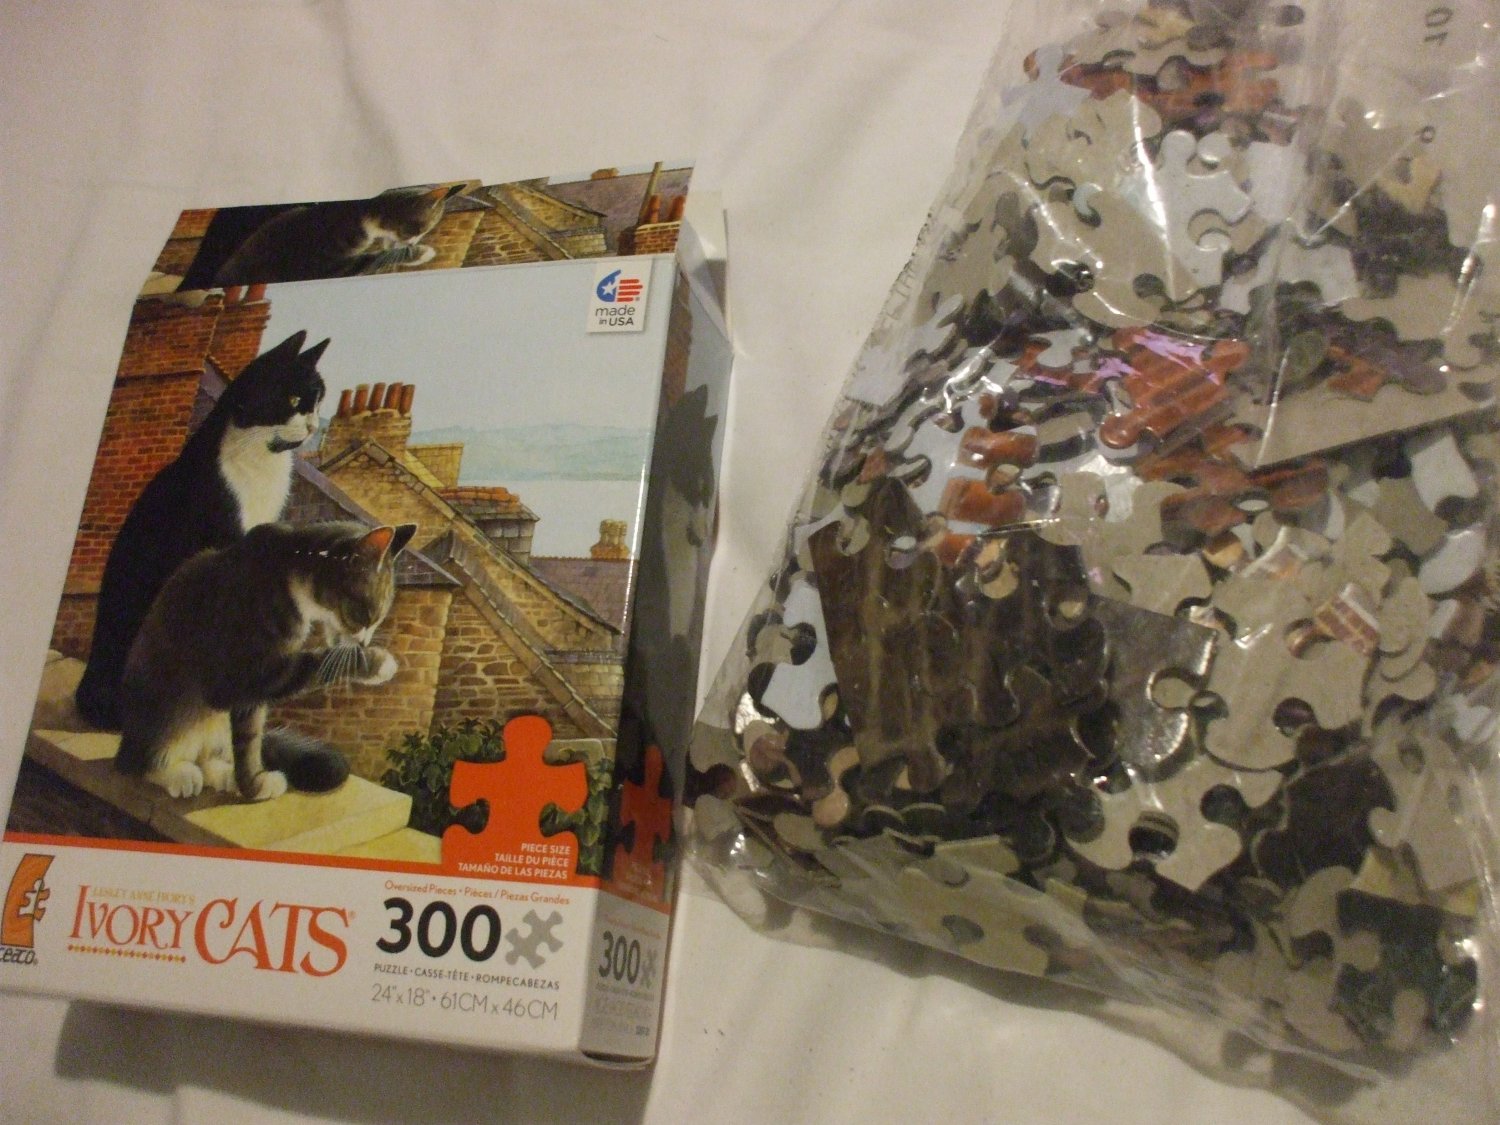 Lesley Ann Ivory's Ivory Cats On The Ledge Ceaco Puzzle